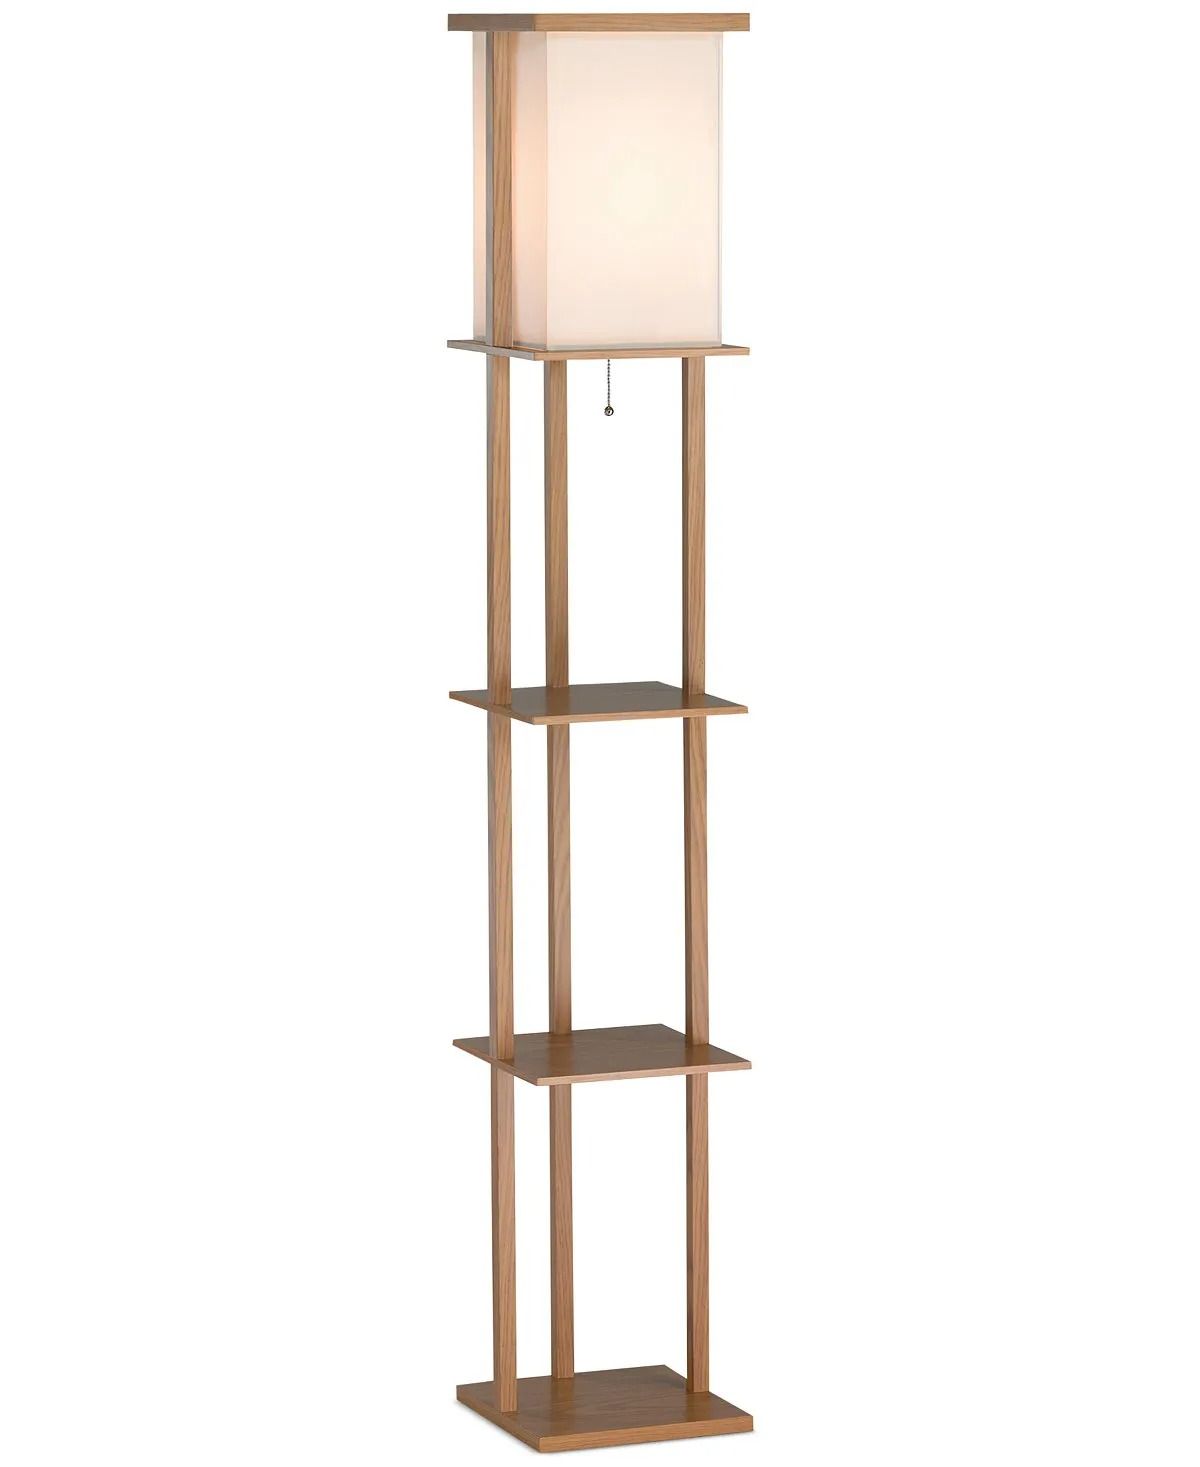 Versatile and Stylish: The Convenience of Floor Lamps With Attached Tables